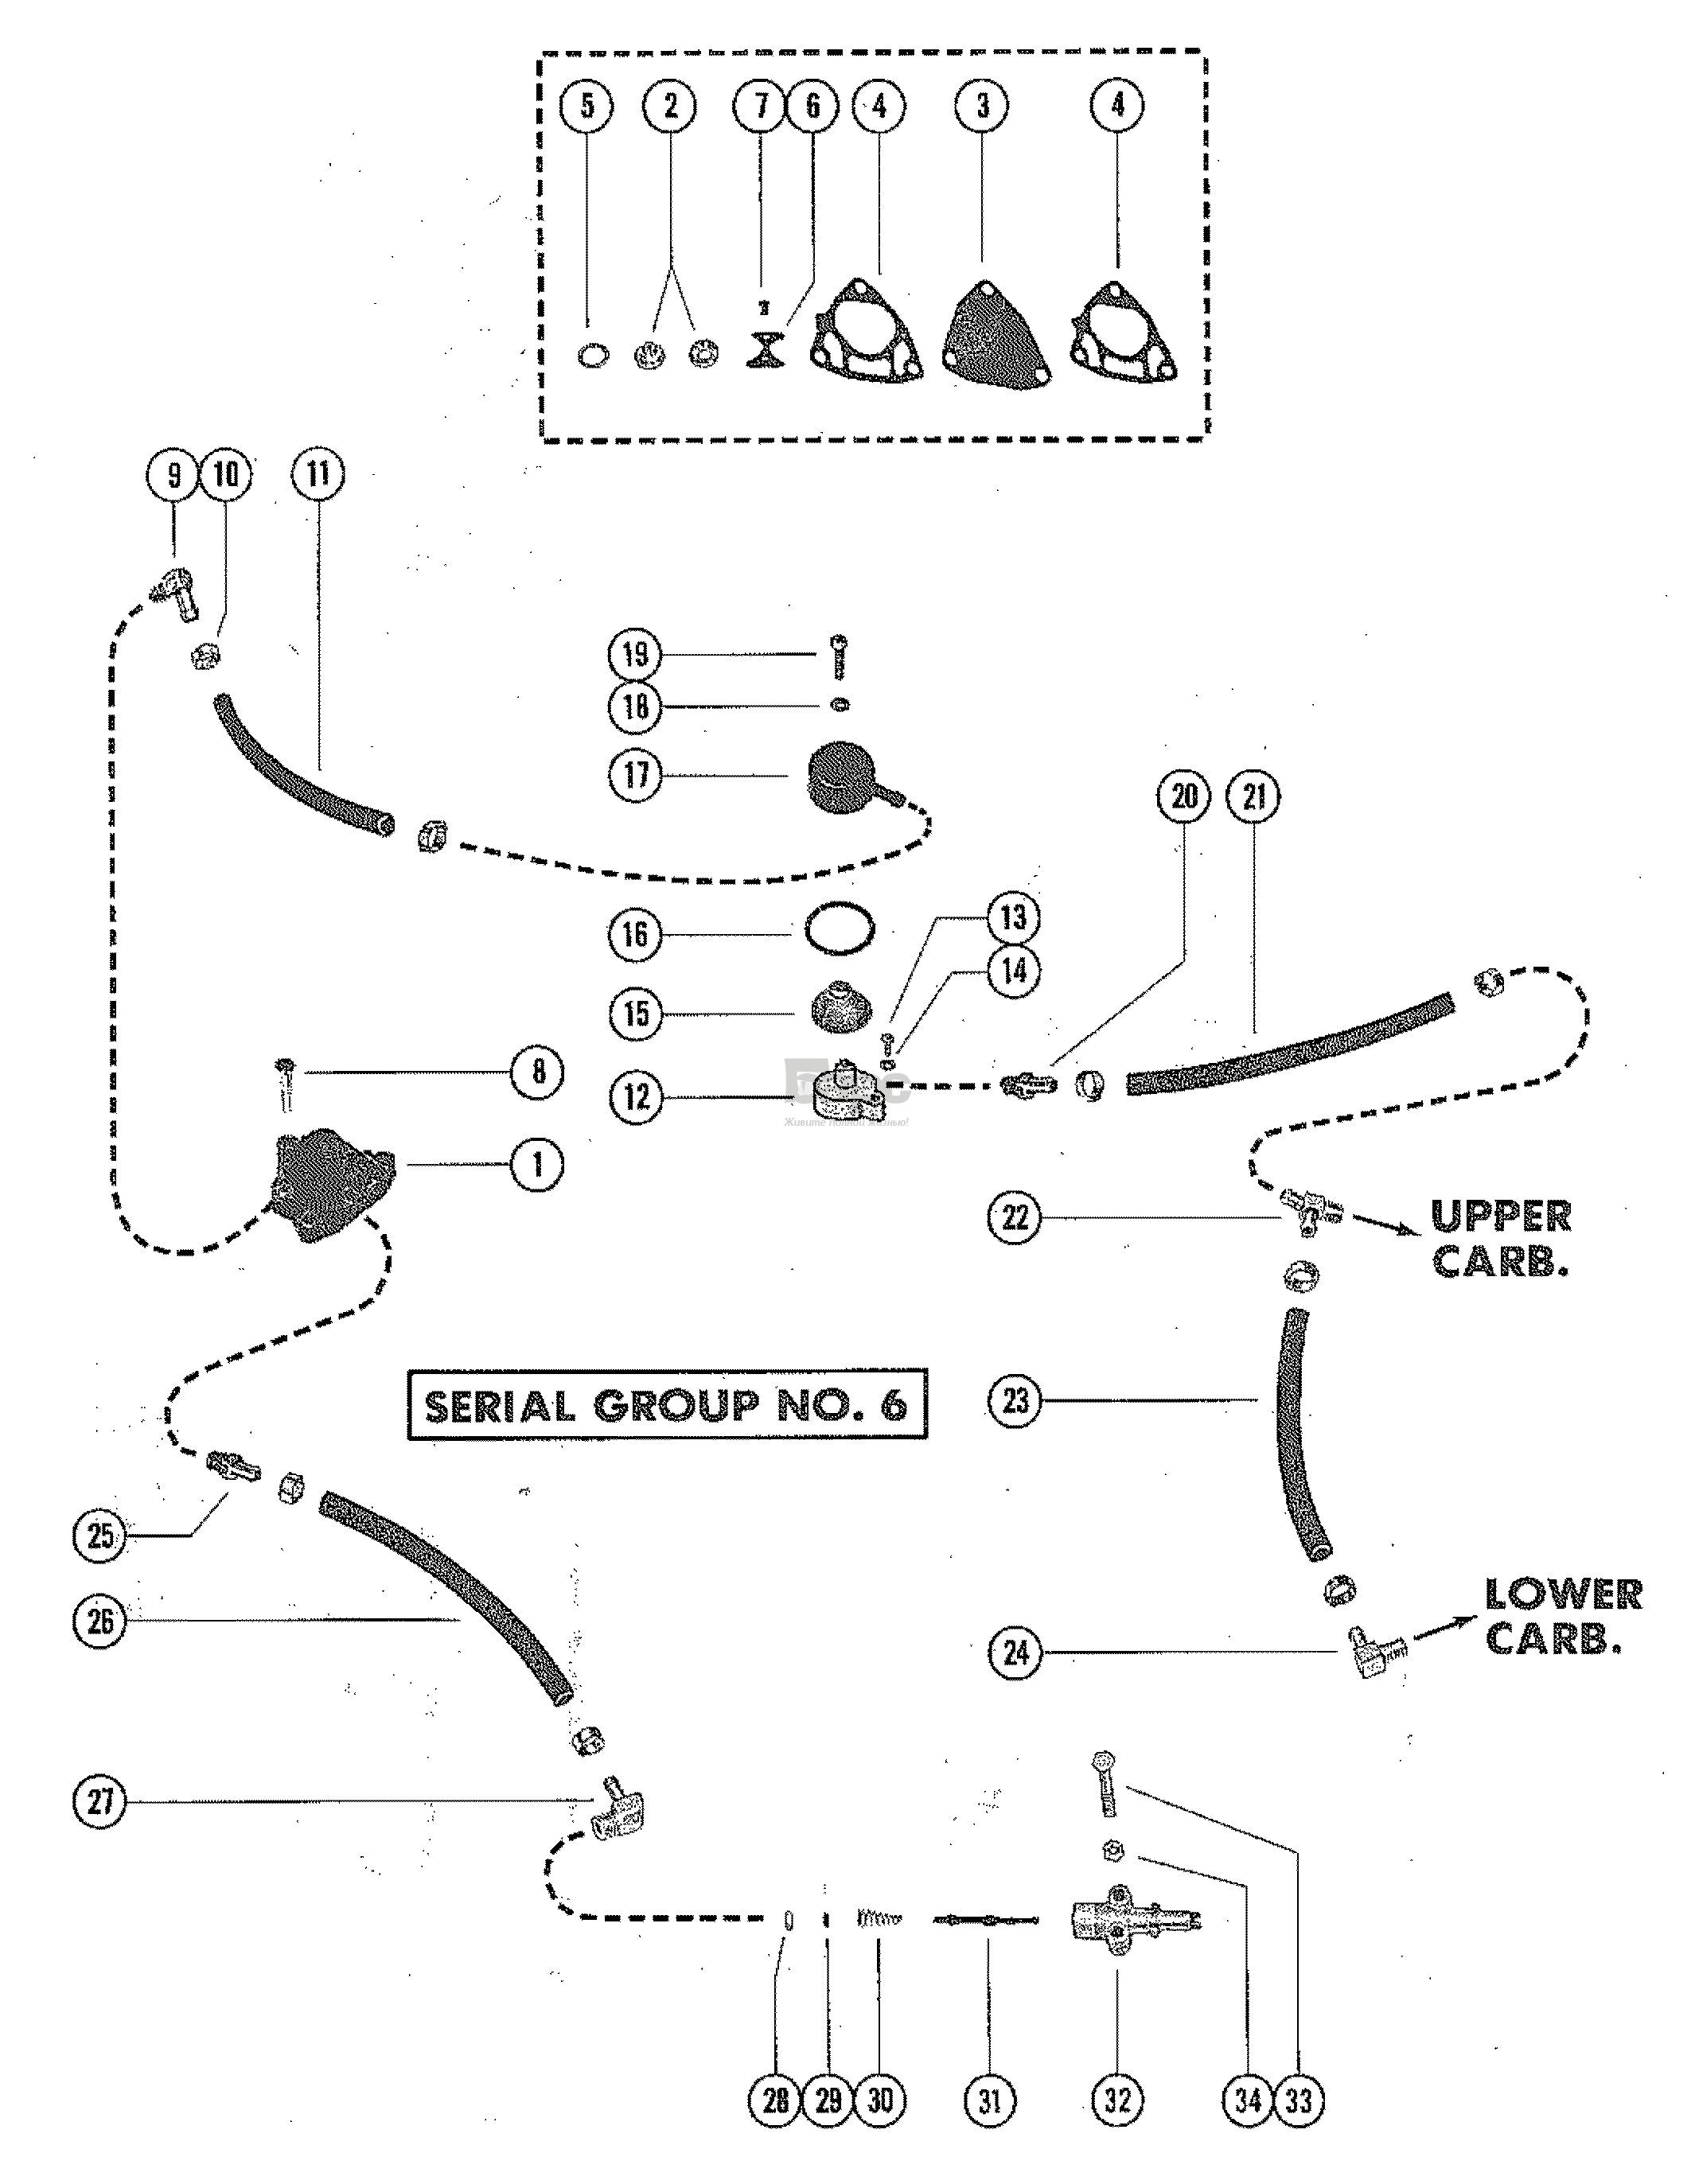 FUEL PUMP AND FUEL LINE ASSEMBLY (SERIAL GROUP NO. 6)